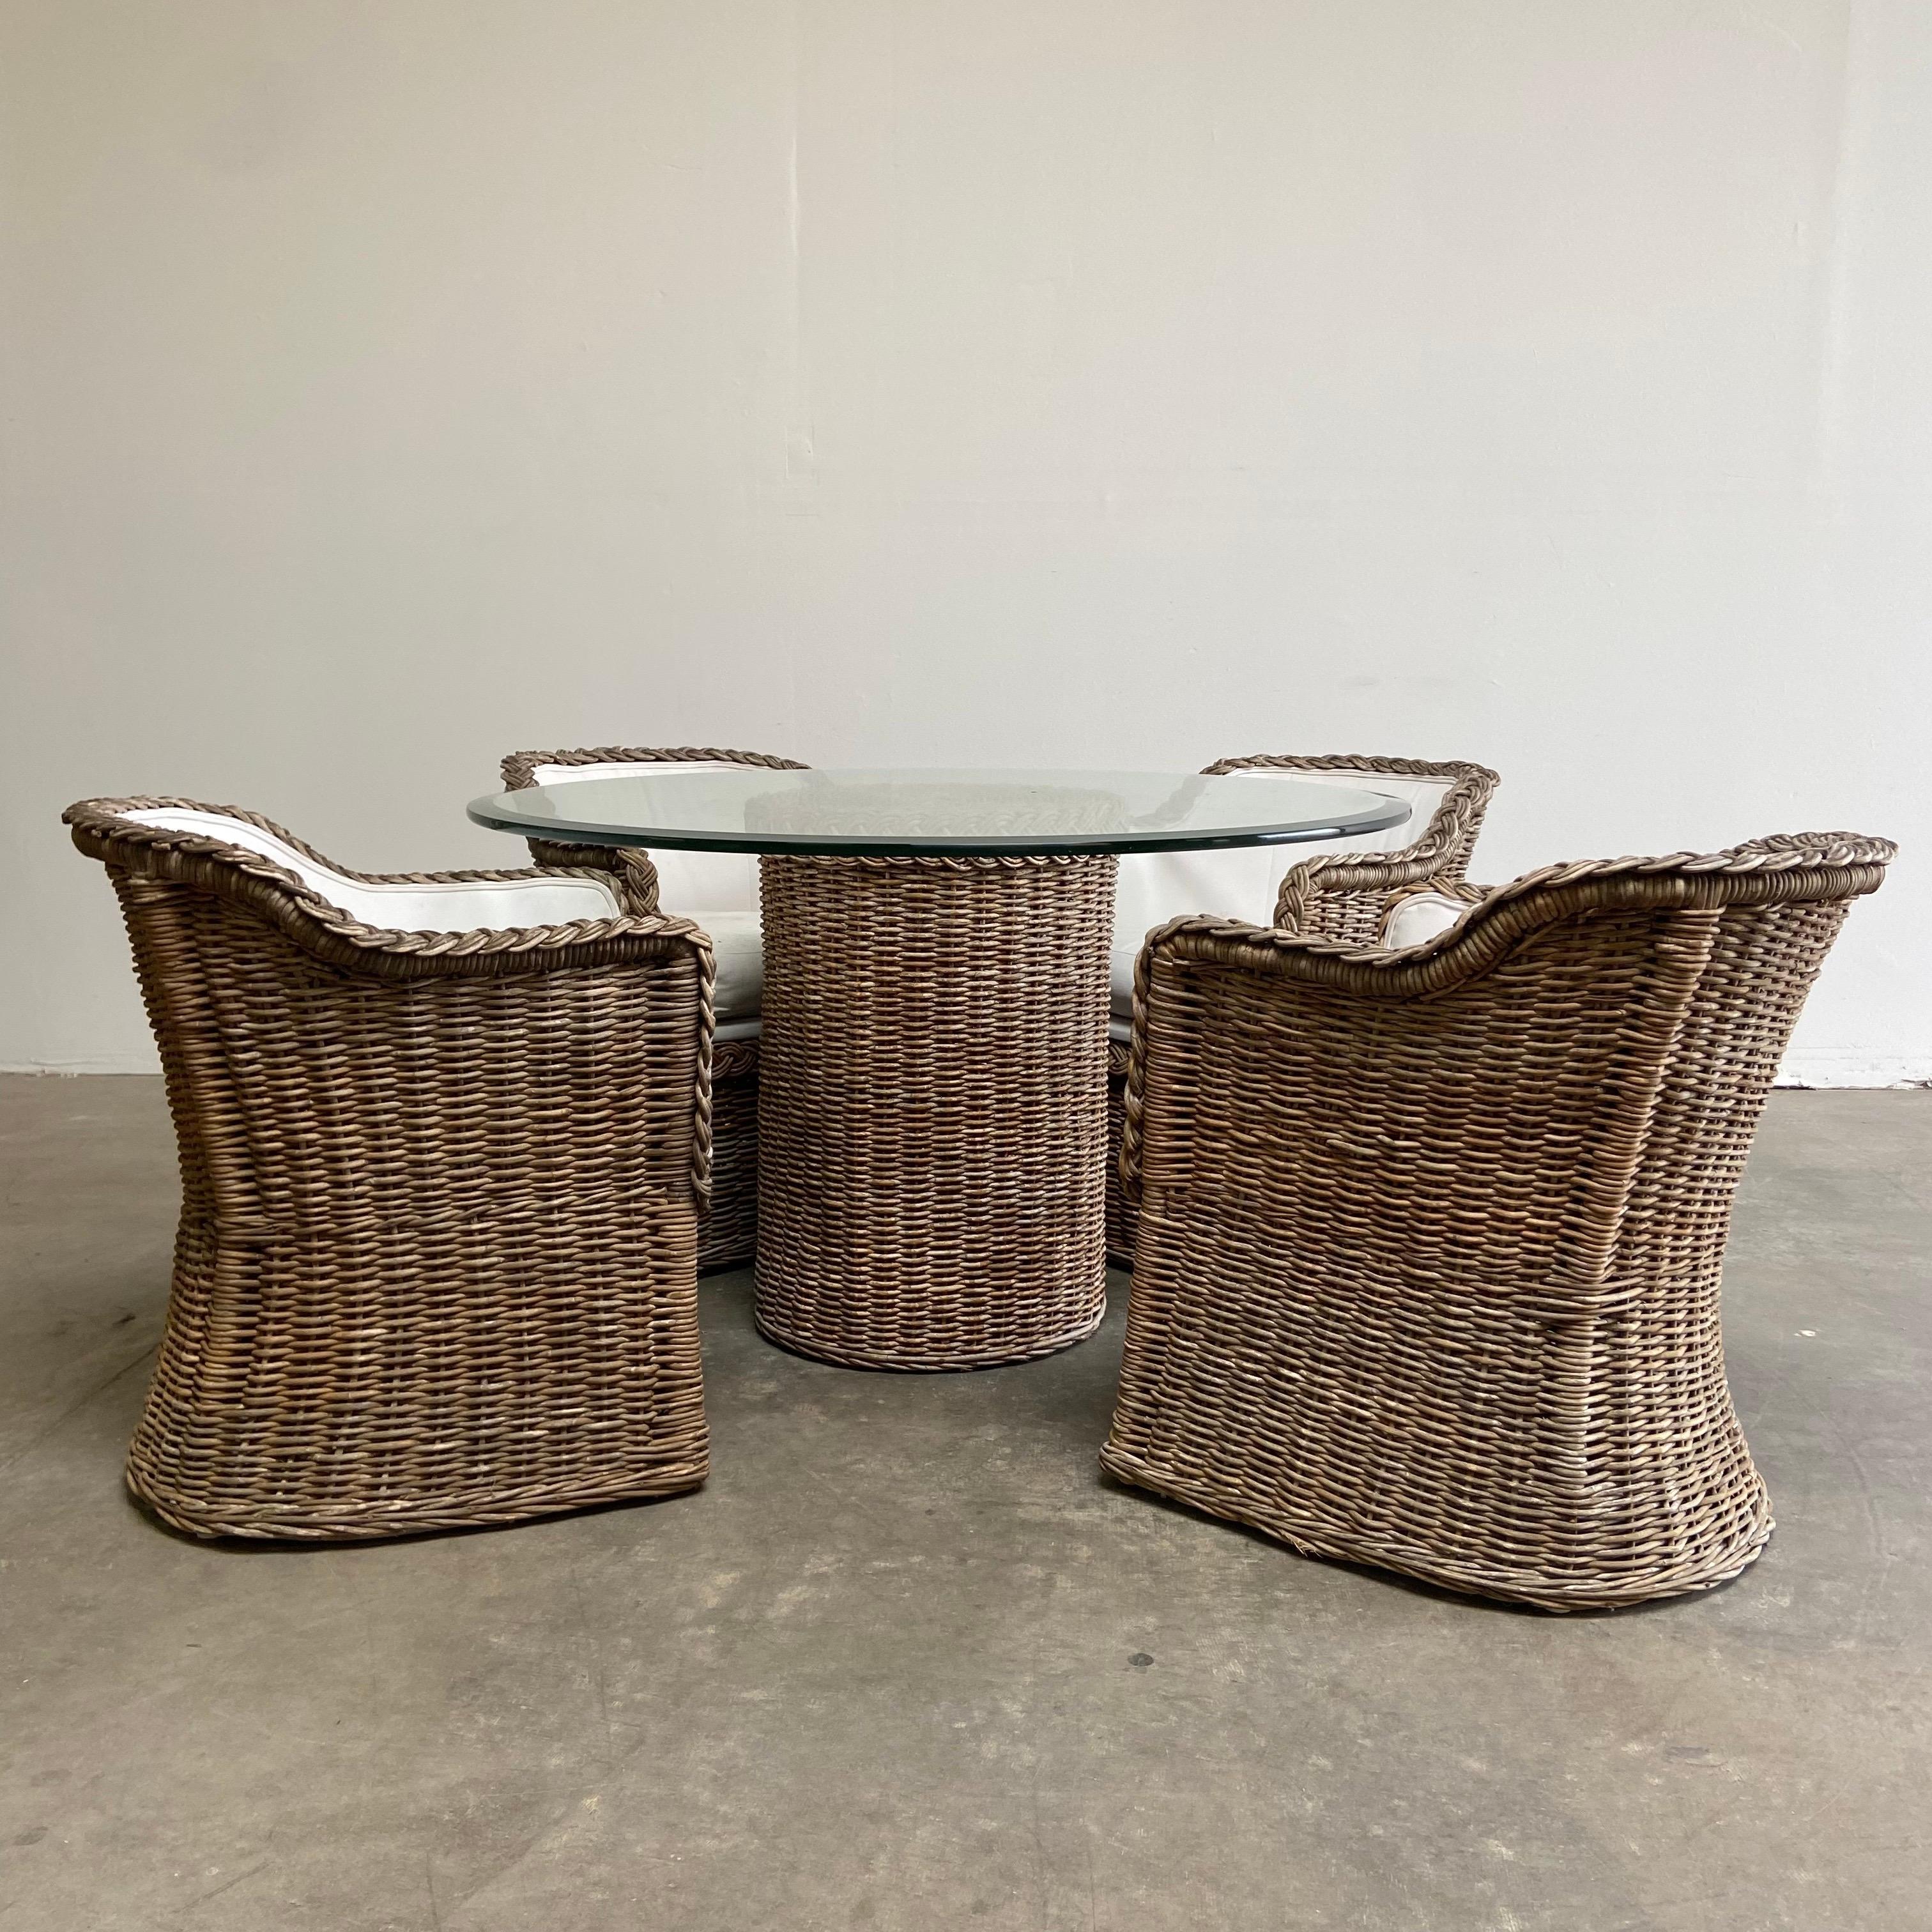 5 pc. Rattan patio dinette set 
Table: 48”rd. X 28-1/2”h
Chairs: 23”w x 26”d x 29”h
SH:19”. SD:20” AH:25”
Overall in good condition. RL Outdoor patio set upholstered in white sunbrella, this sunbrella has heavy use, with stains and other markings.